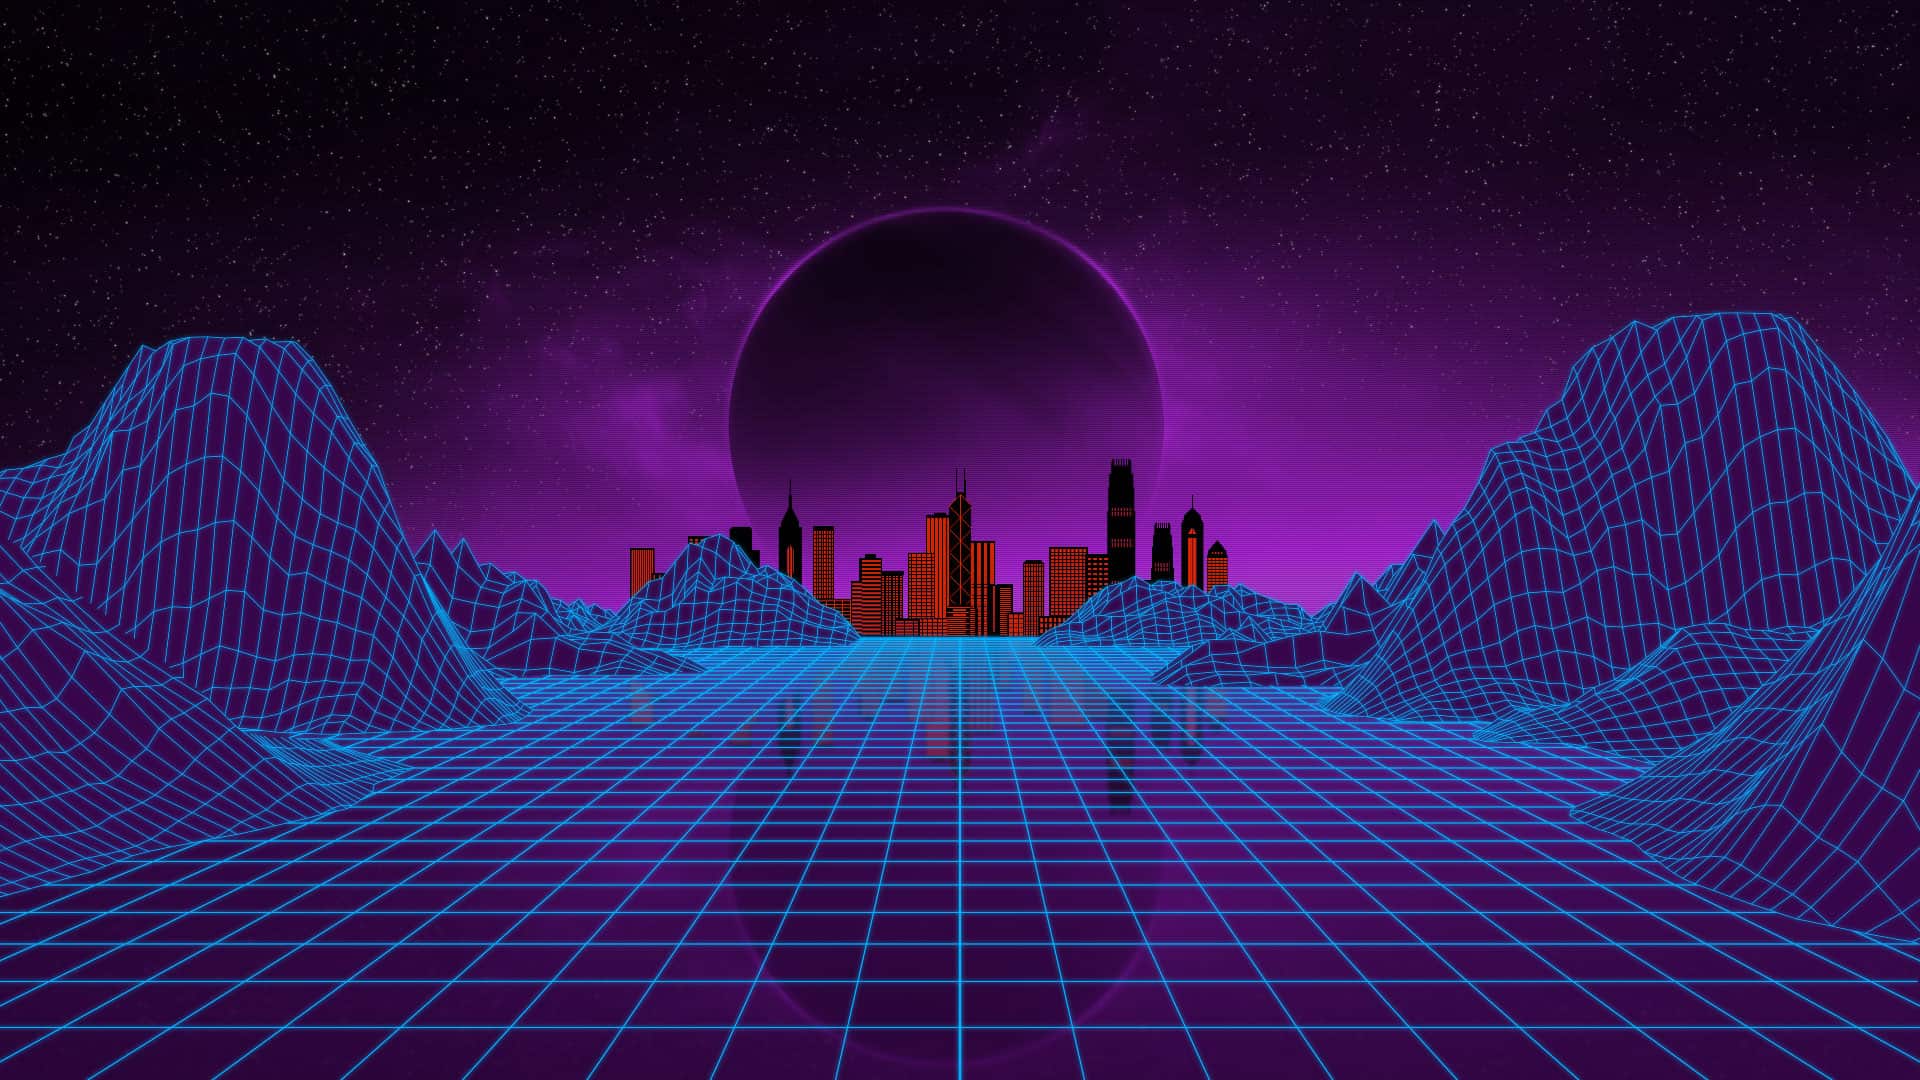 METAVERSE IMAGE WALLPAPER Gamers of the NFT-based game Tezotopia, created by Gif Games, will connect with brands while keeping full control of their identities in the metaverse.